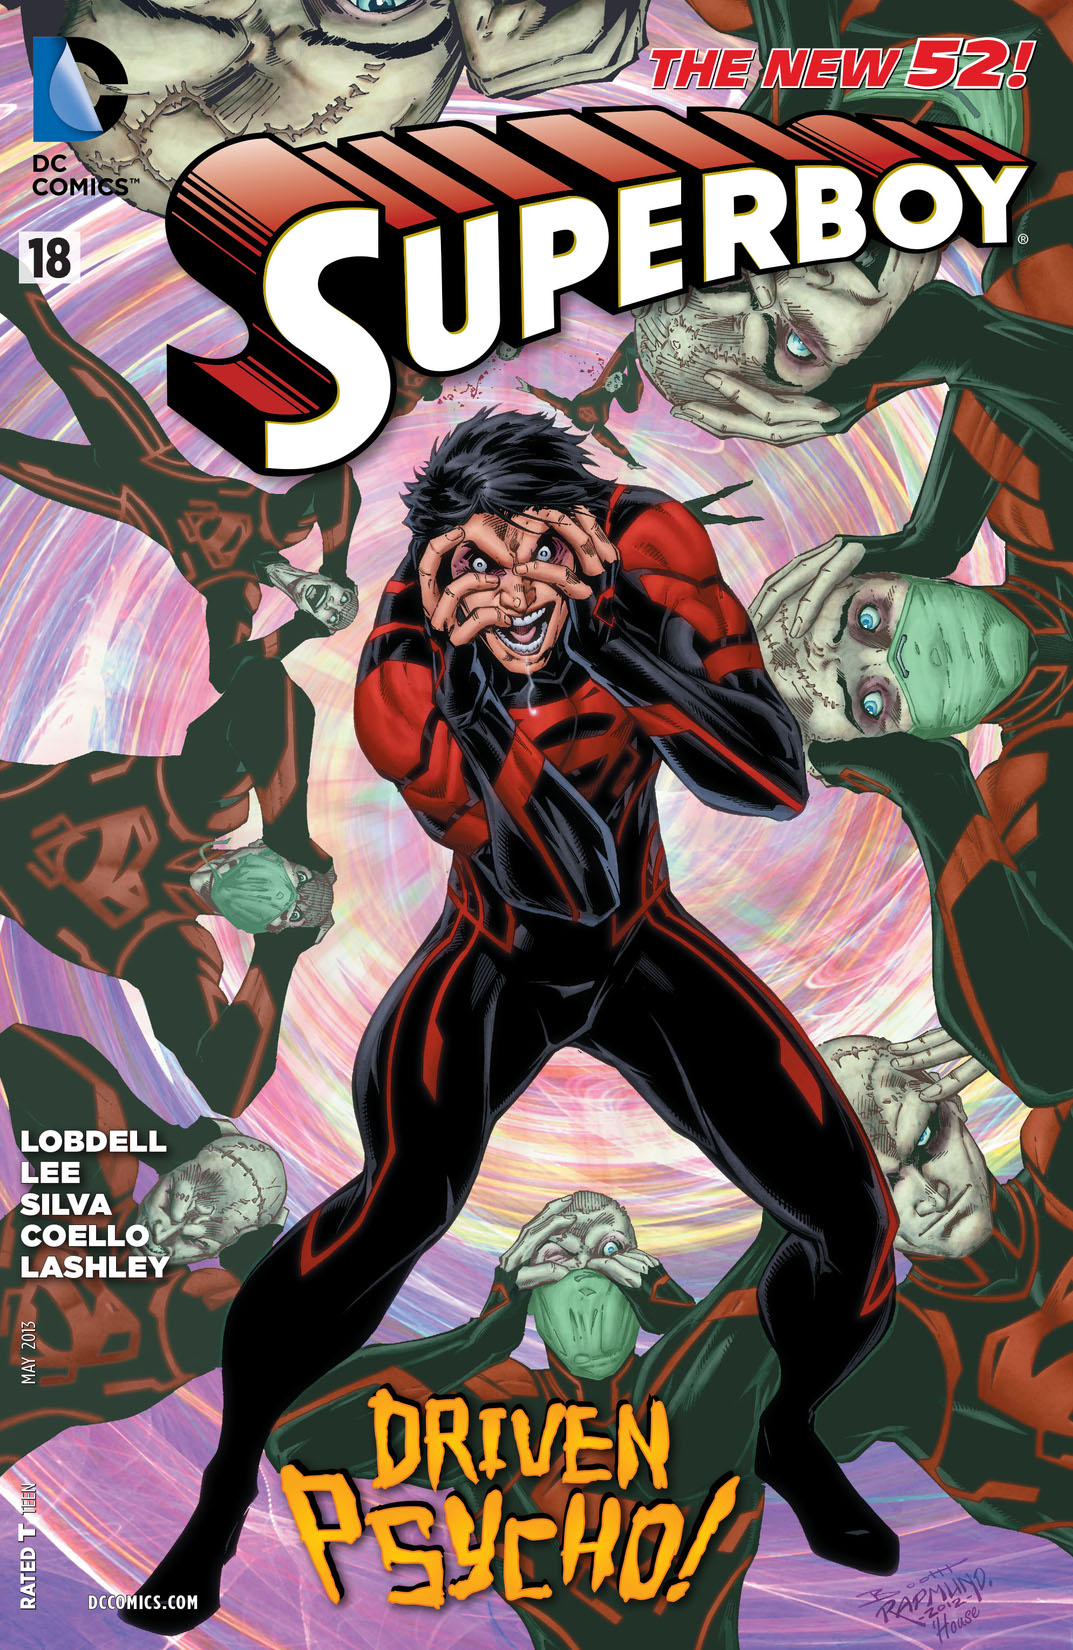 Superboy (2011-) #18 preview images